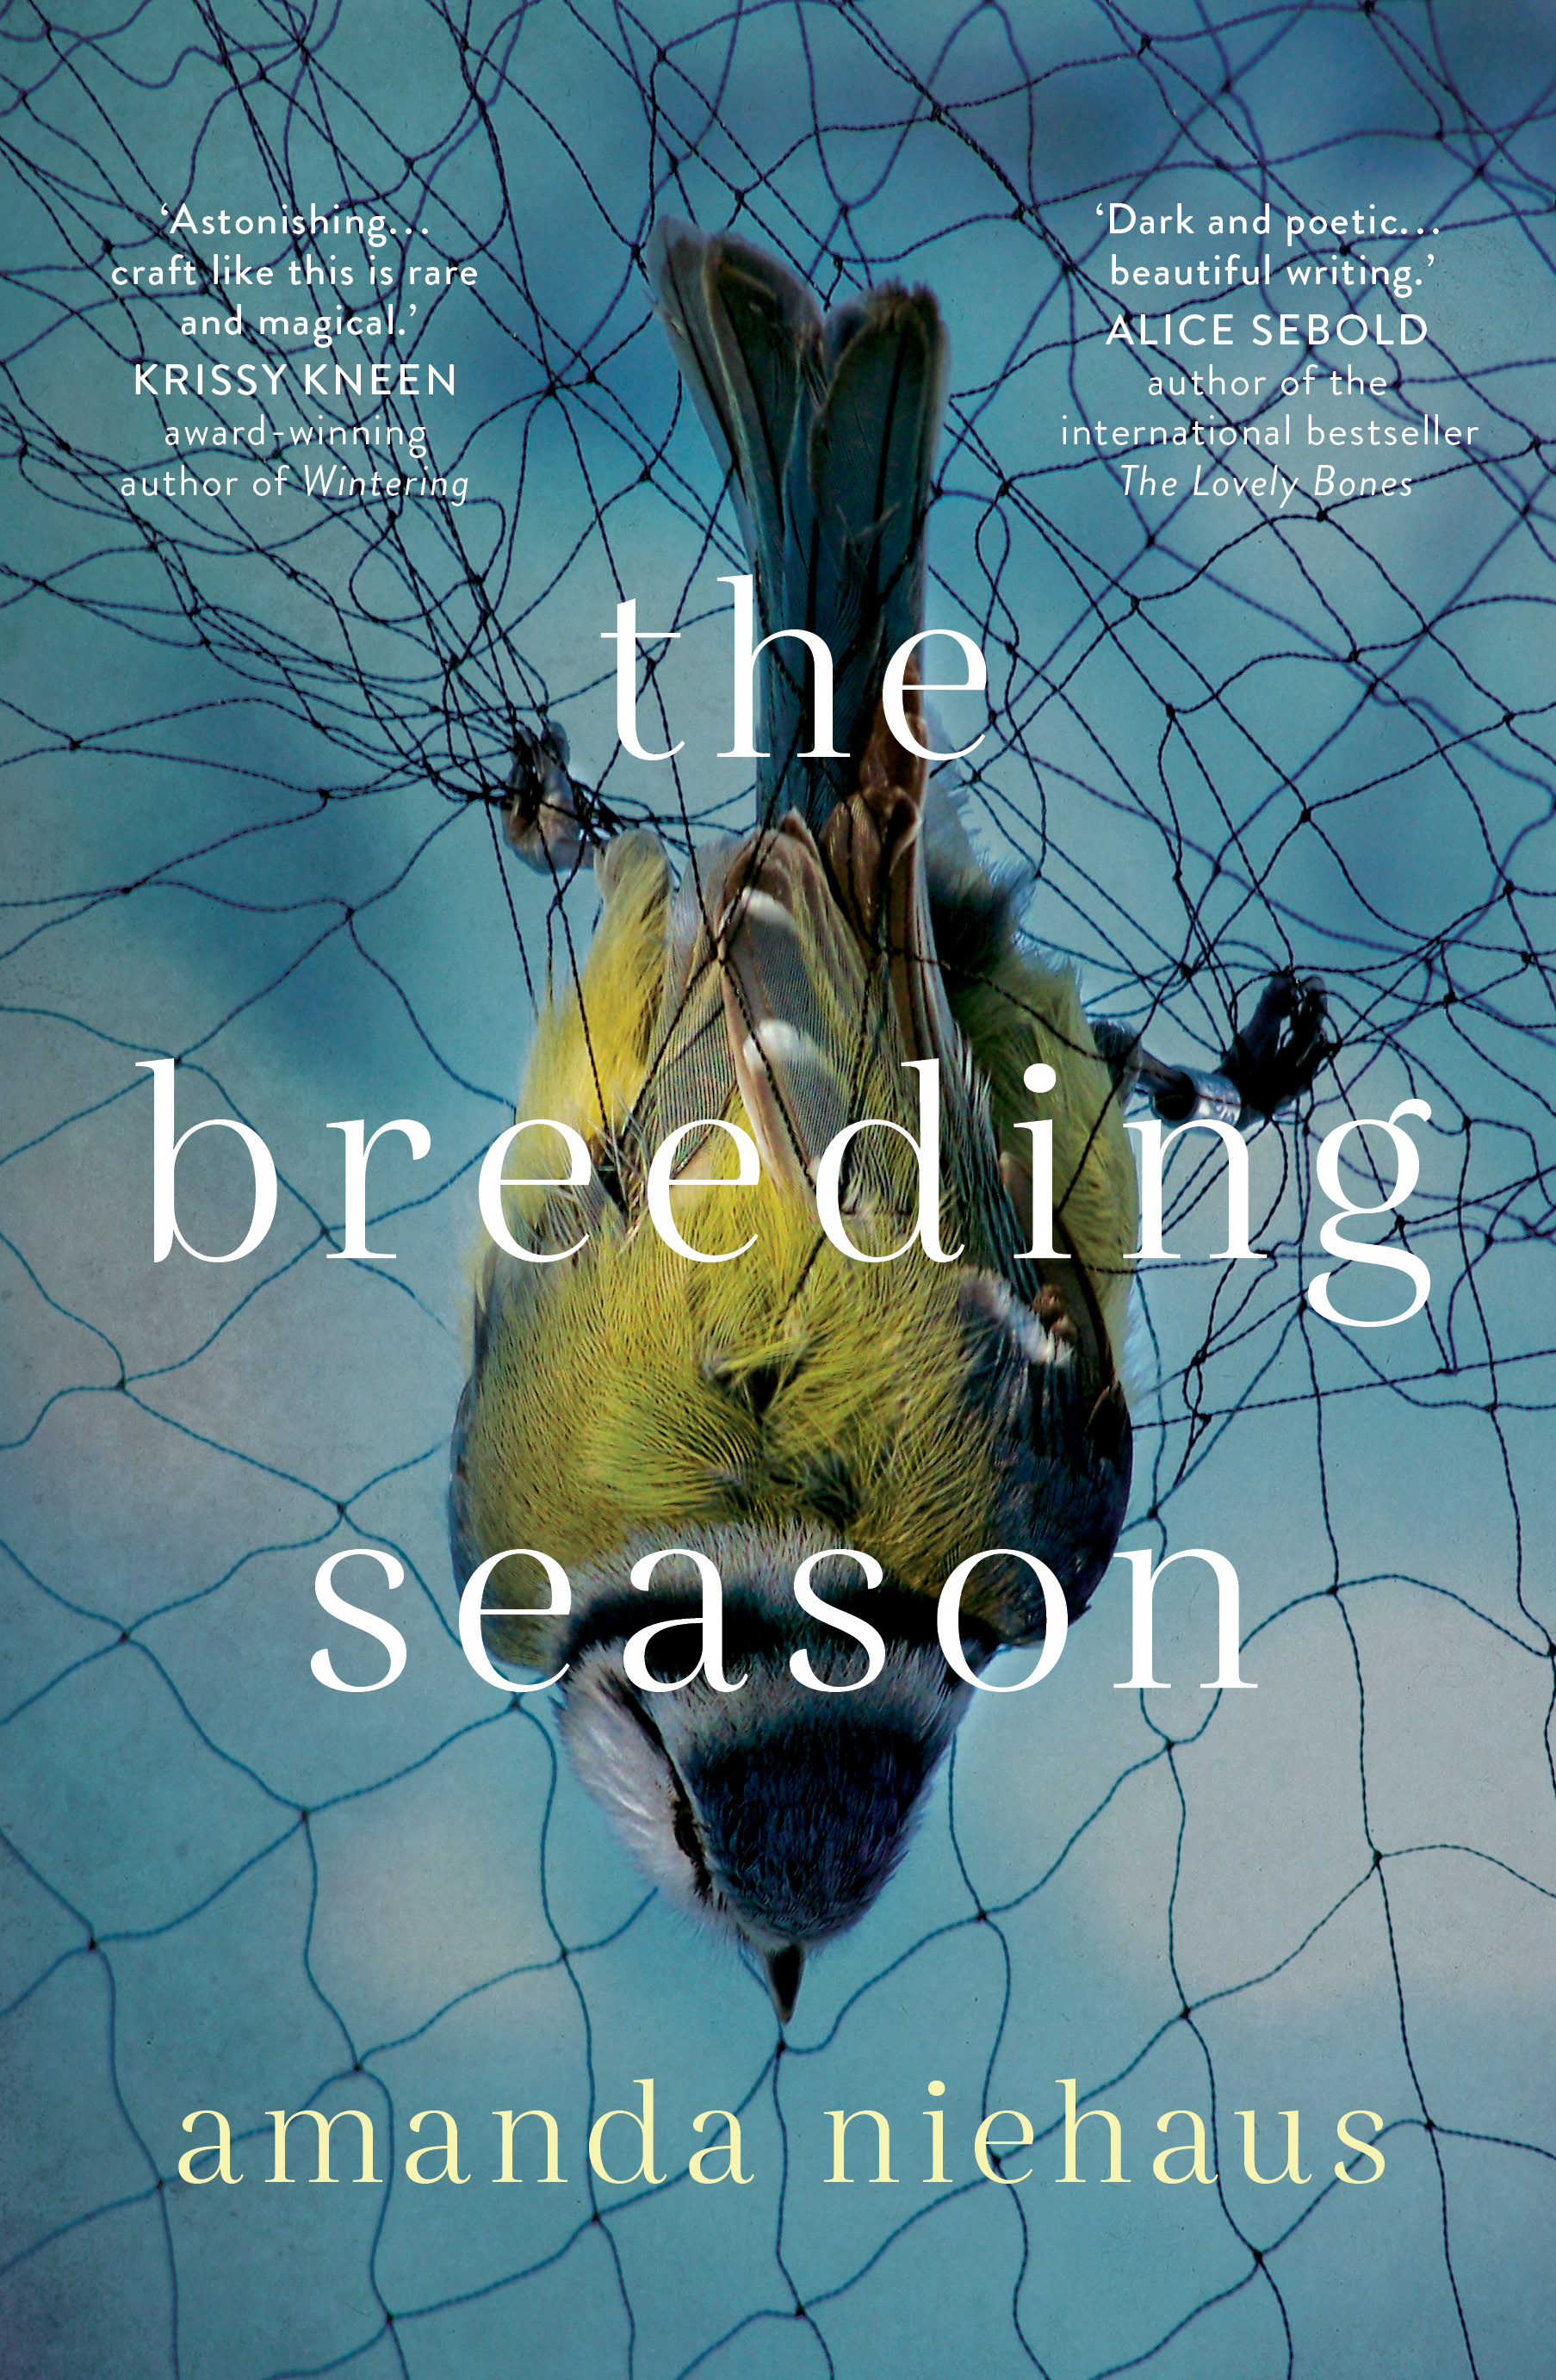 The Breeding Season by Amanda Niehaus book cover: a bird holds onto tangled wire.